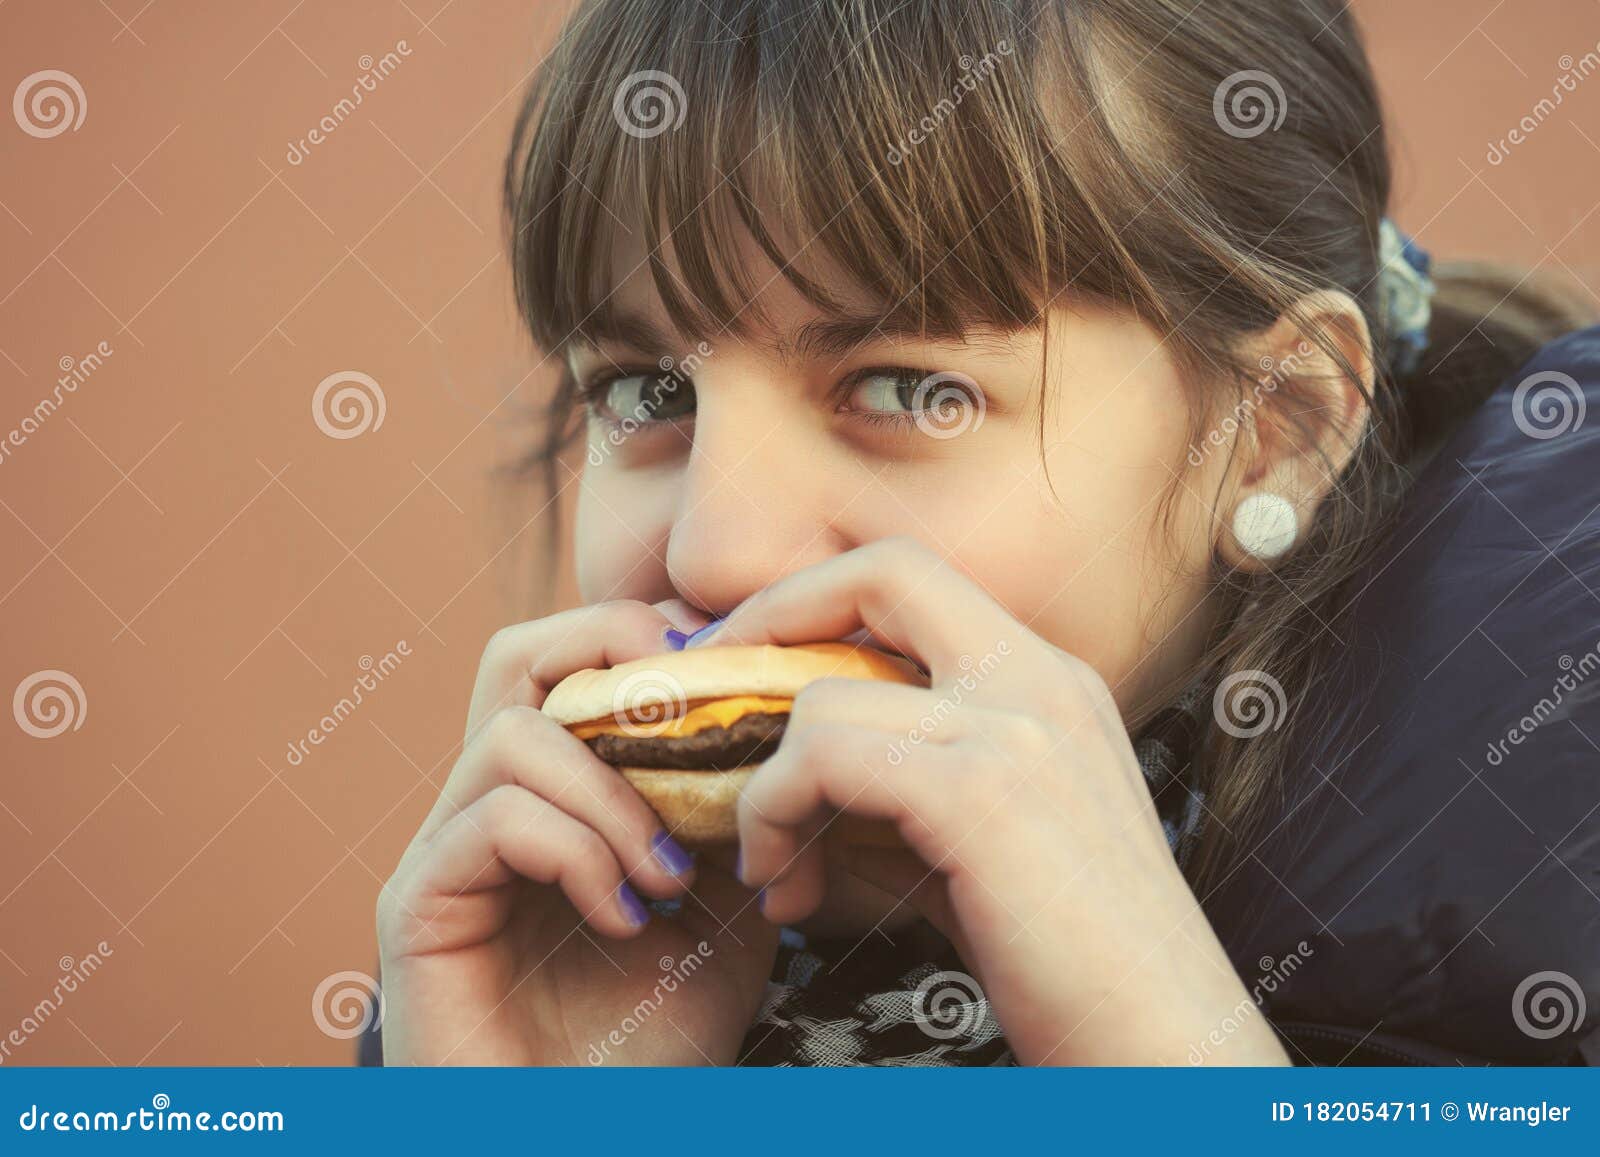 Happy Teen Girl Eating A Burger Stock Image Image Of Happy Ch